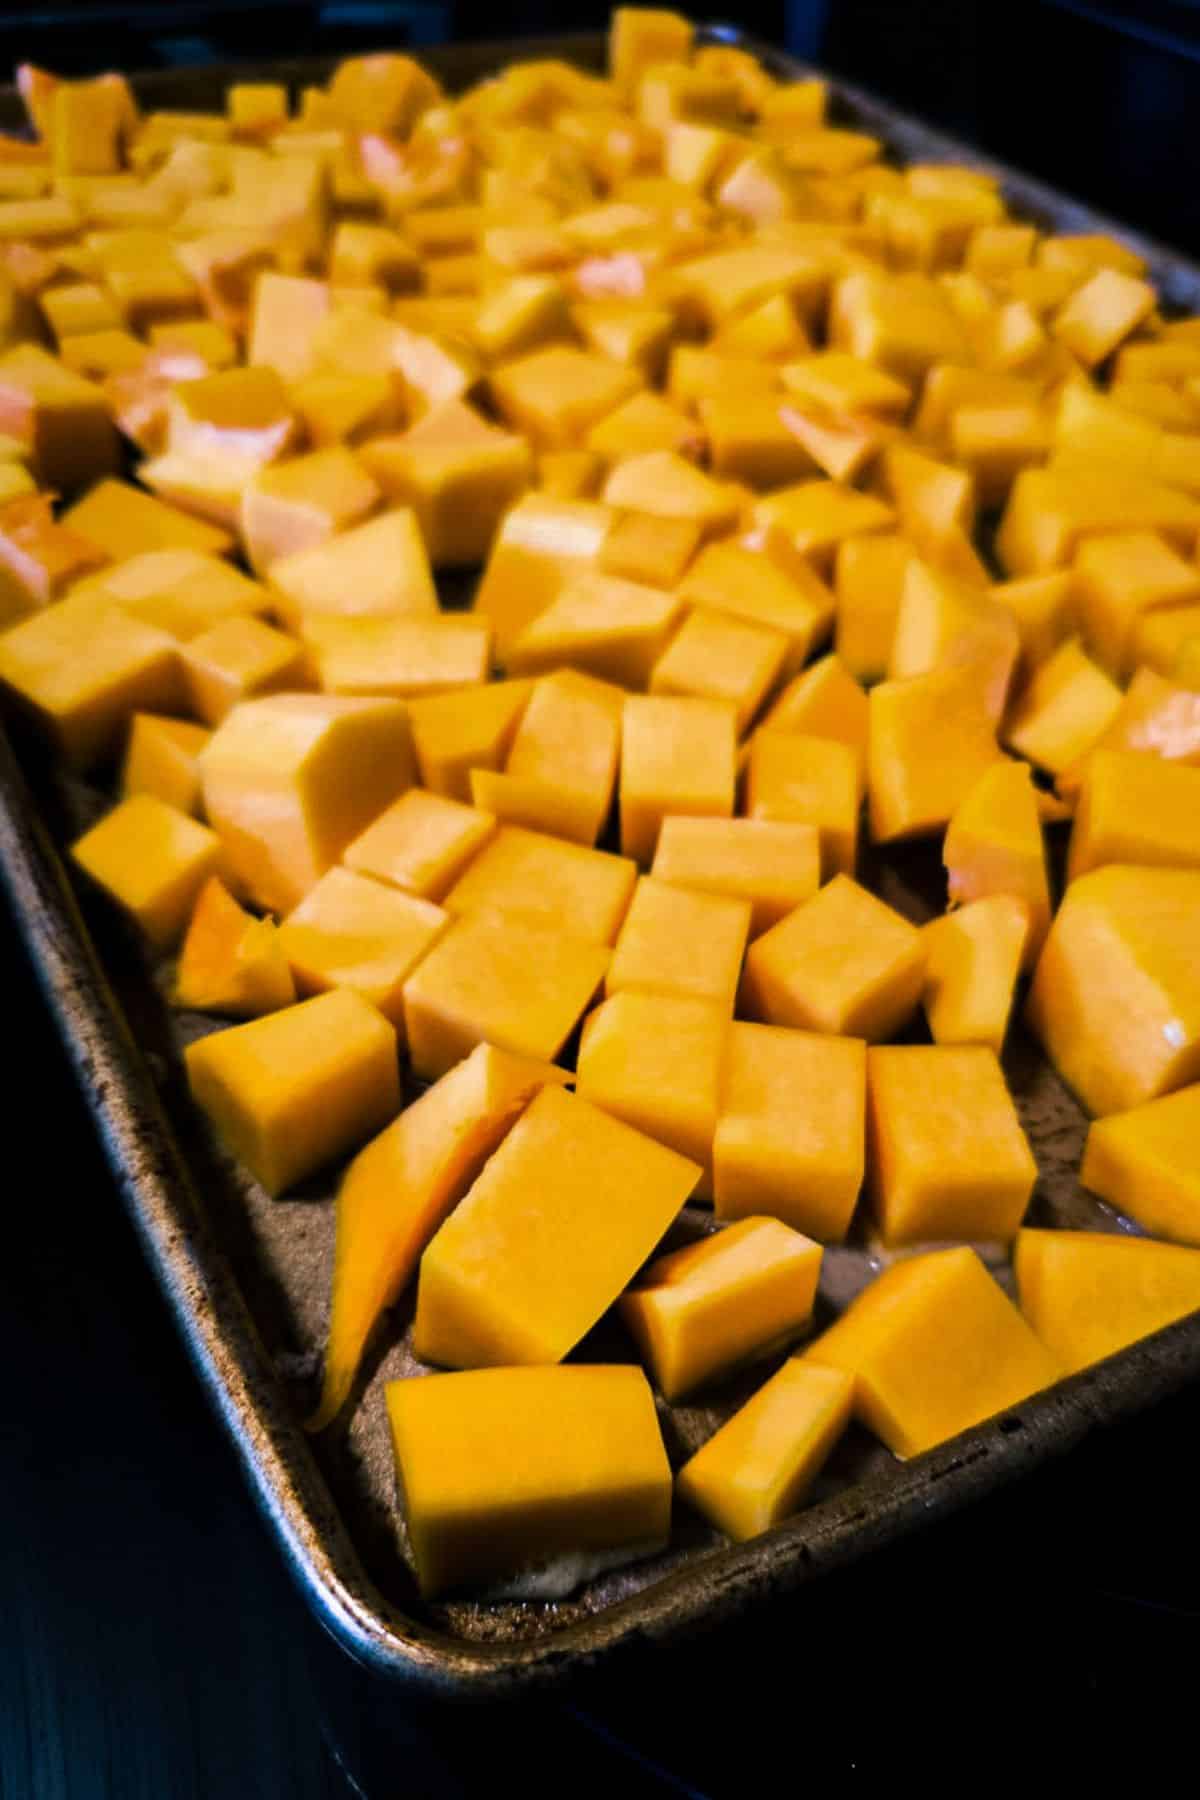 Image of butternut squash on a baking sheet pan before going into the oven.